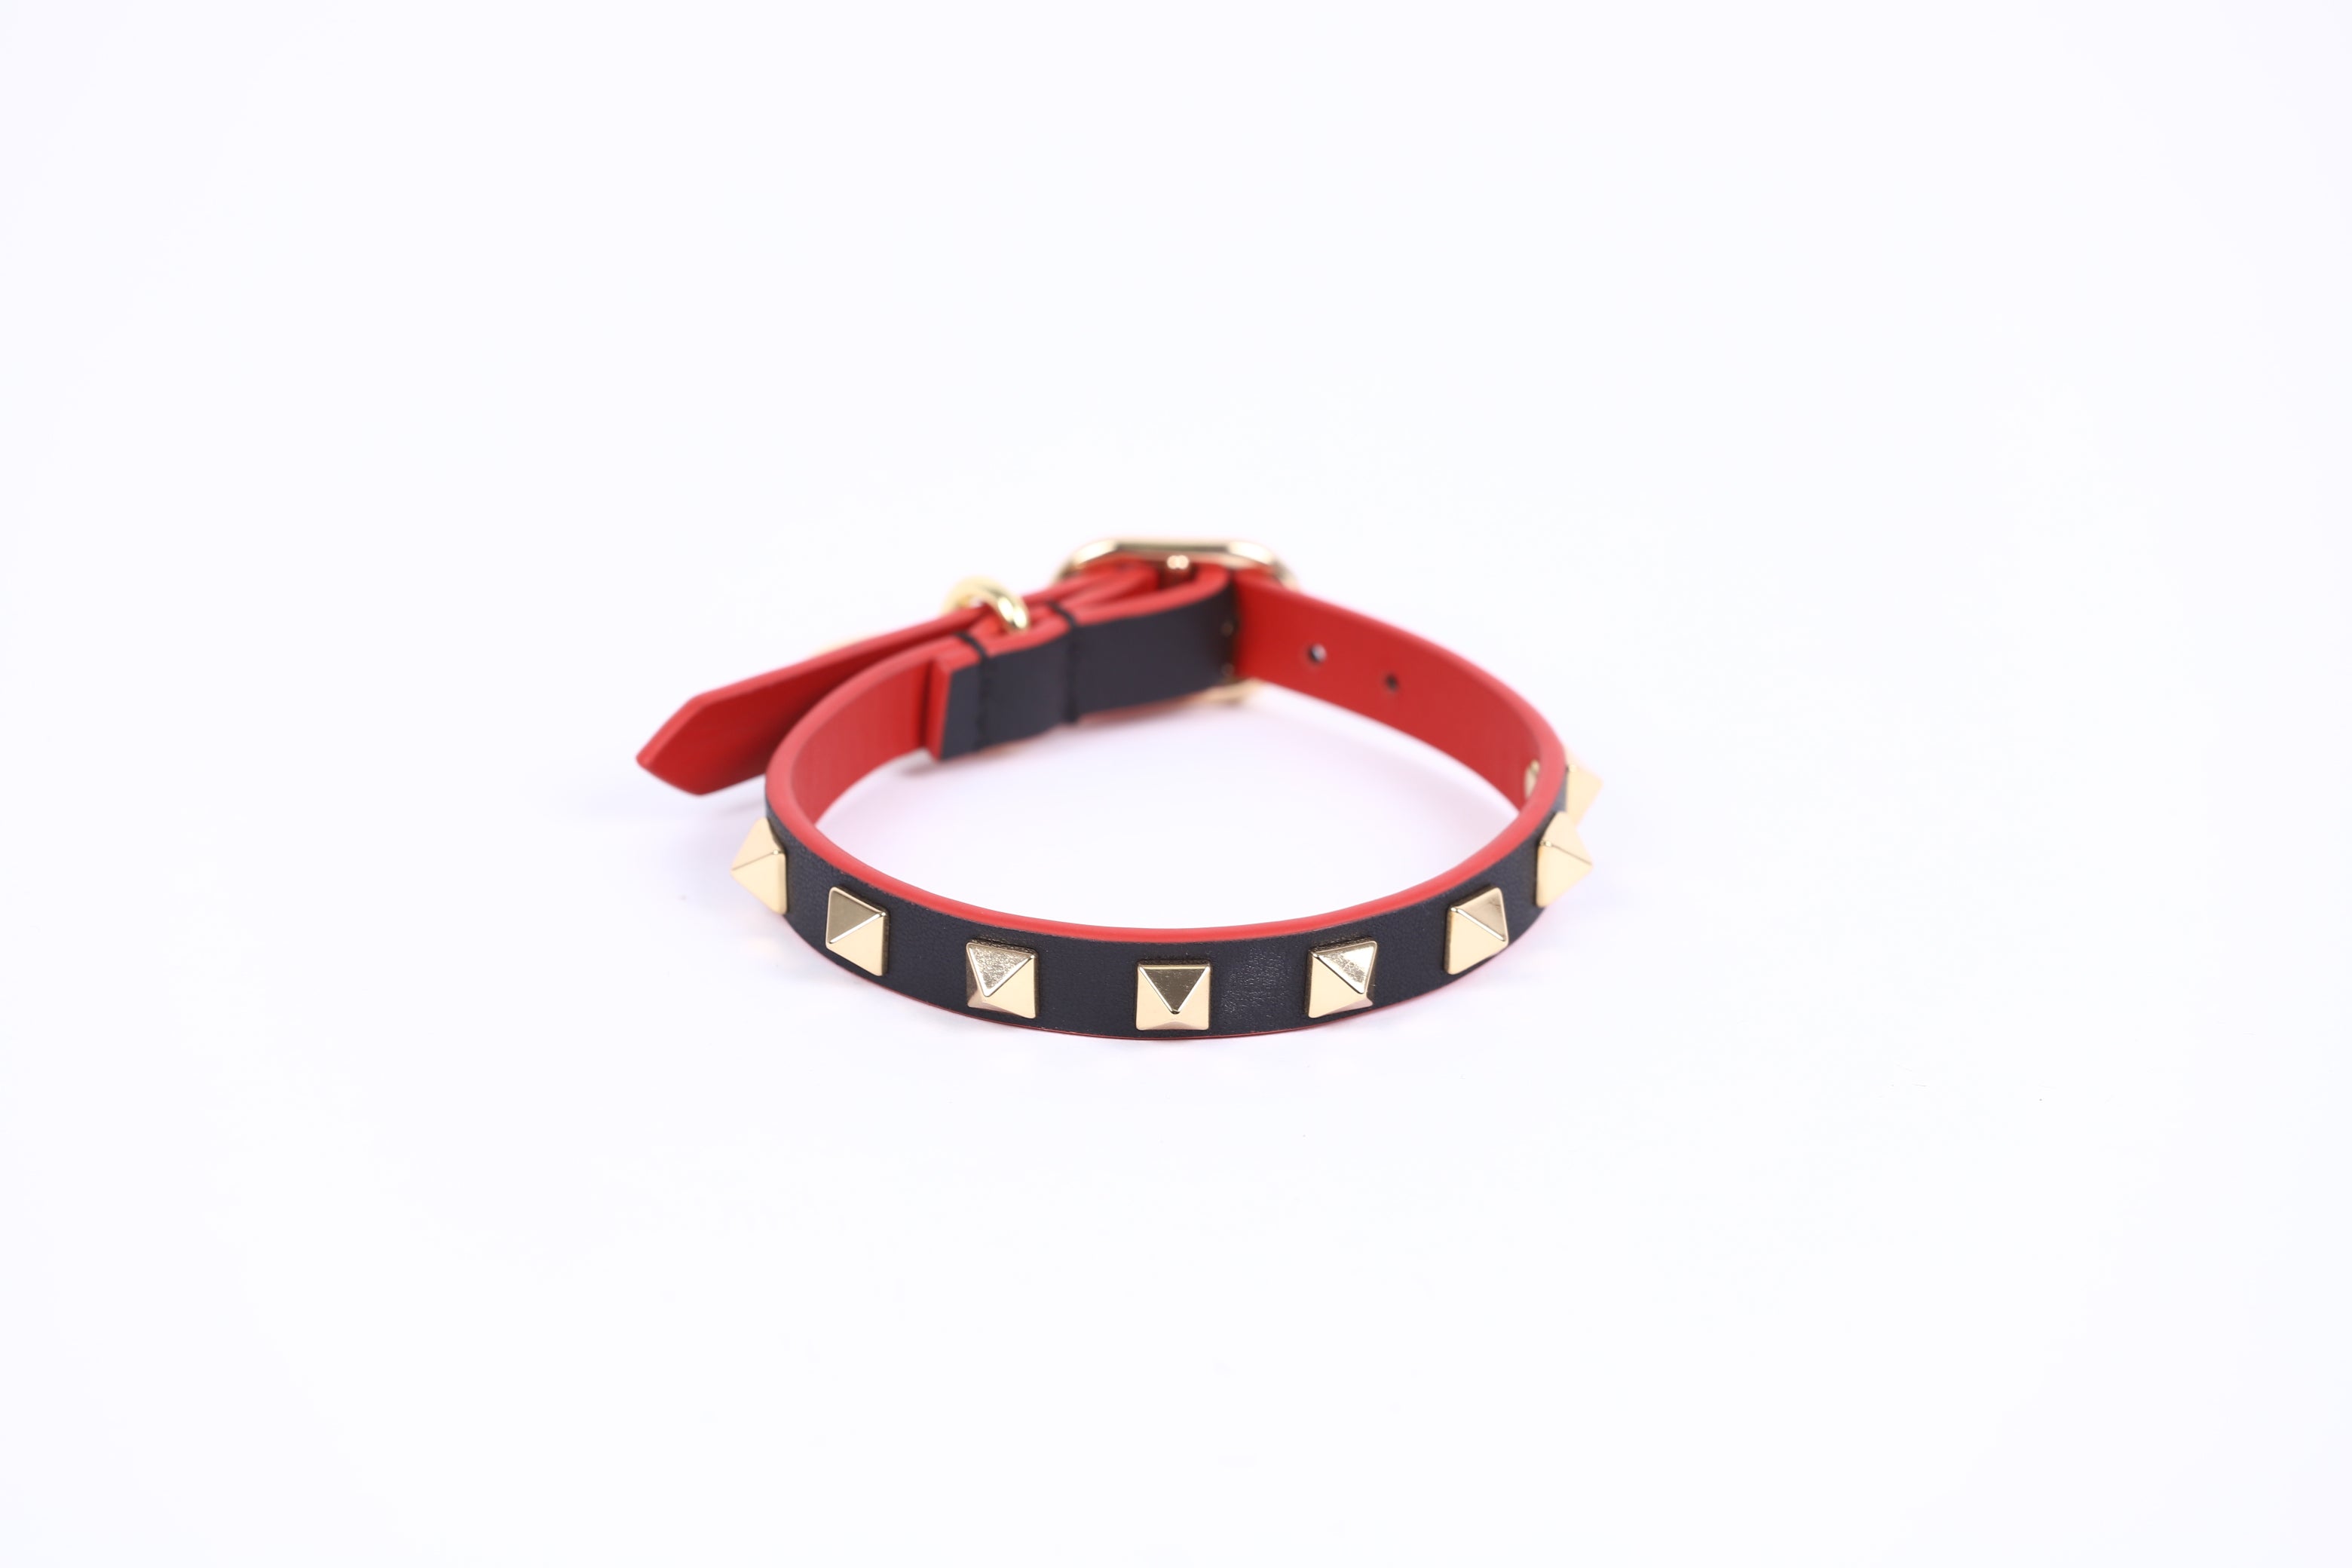 Collar studded red and black